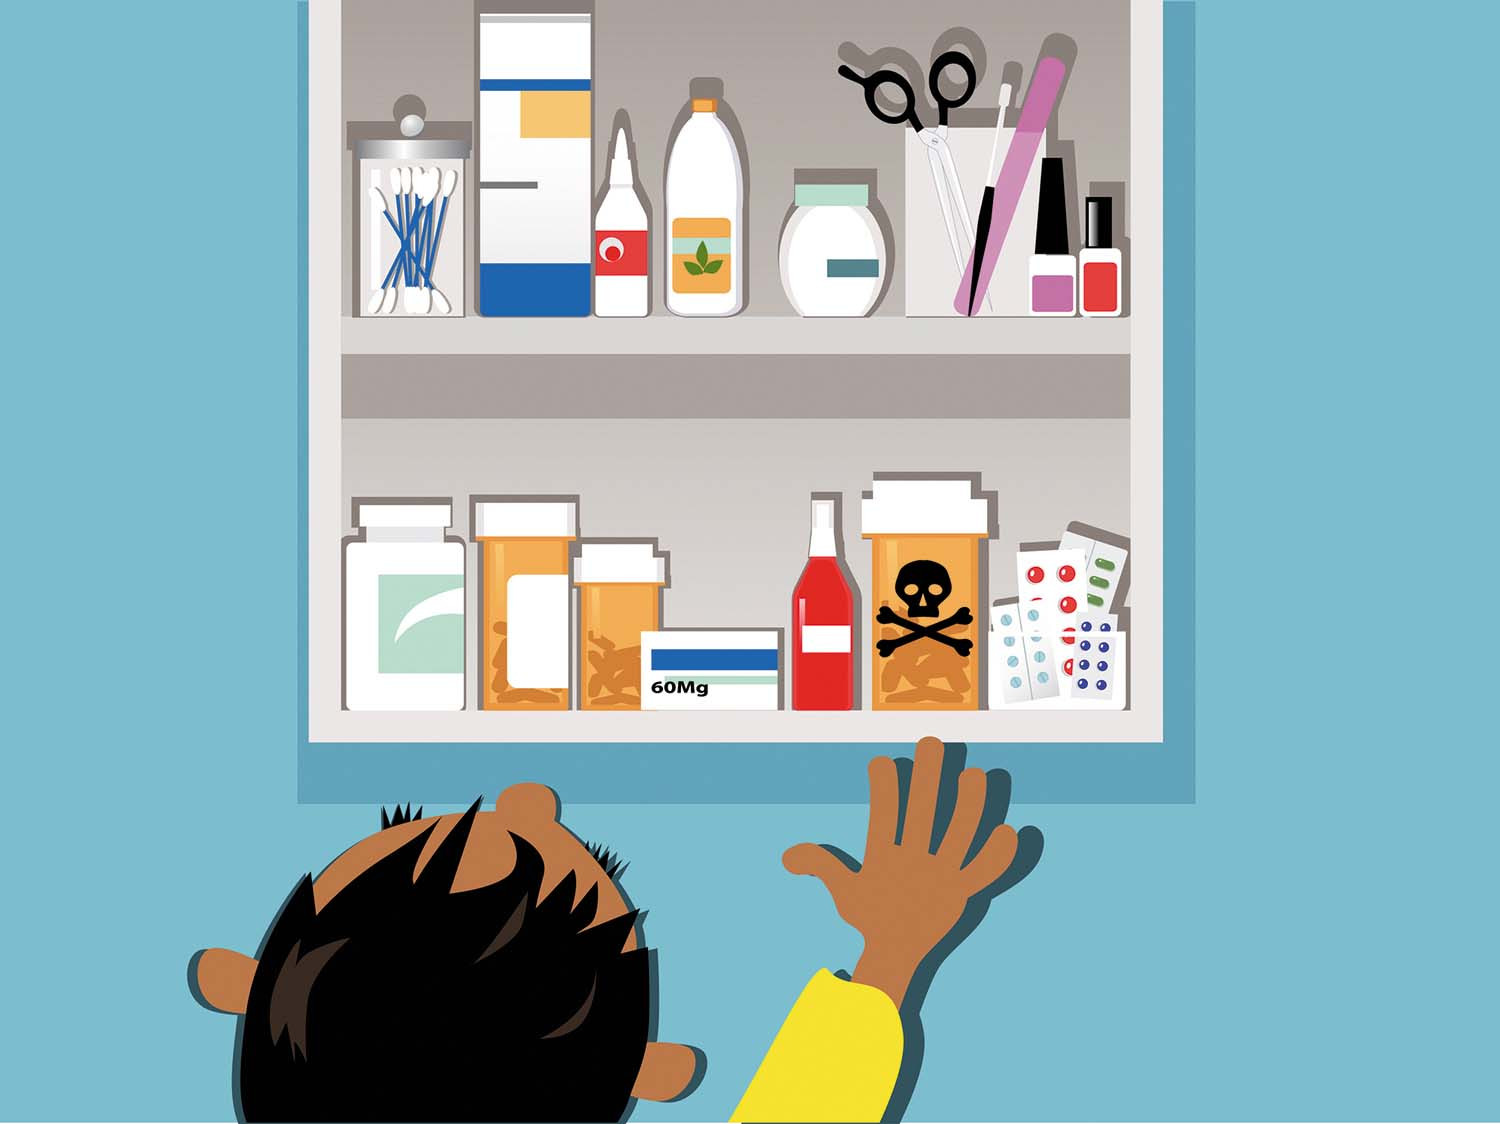 illustration of an open medicine cabinet with a child reaching up toward it